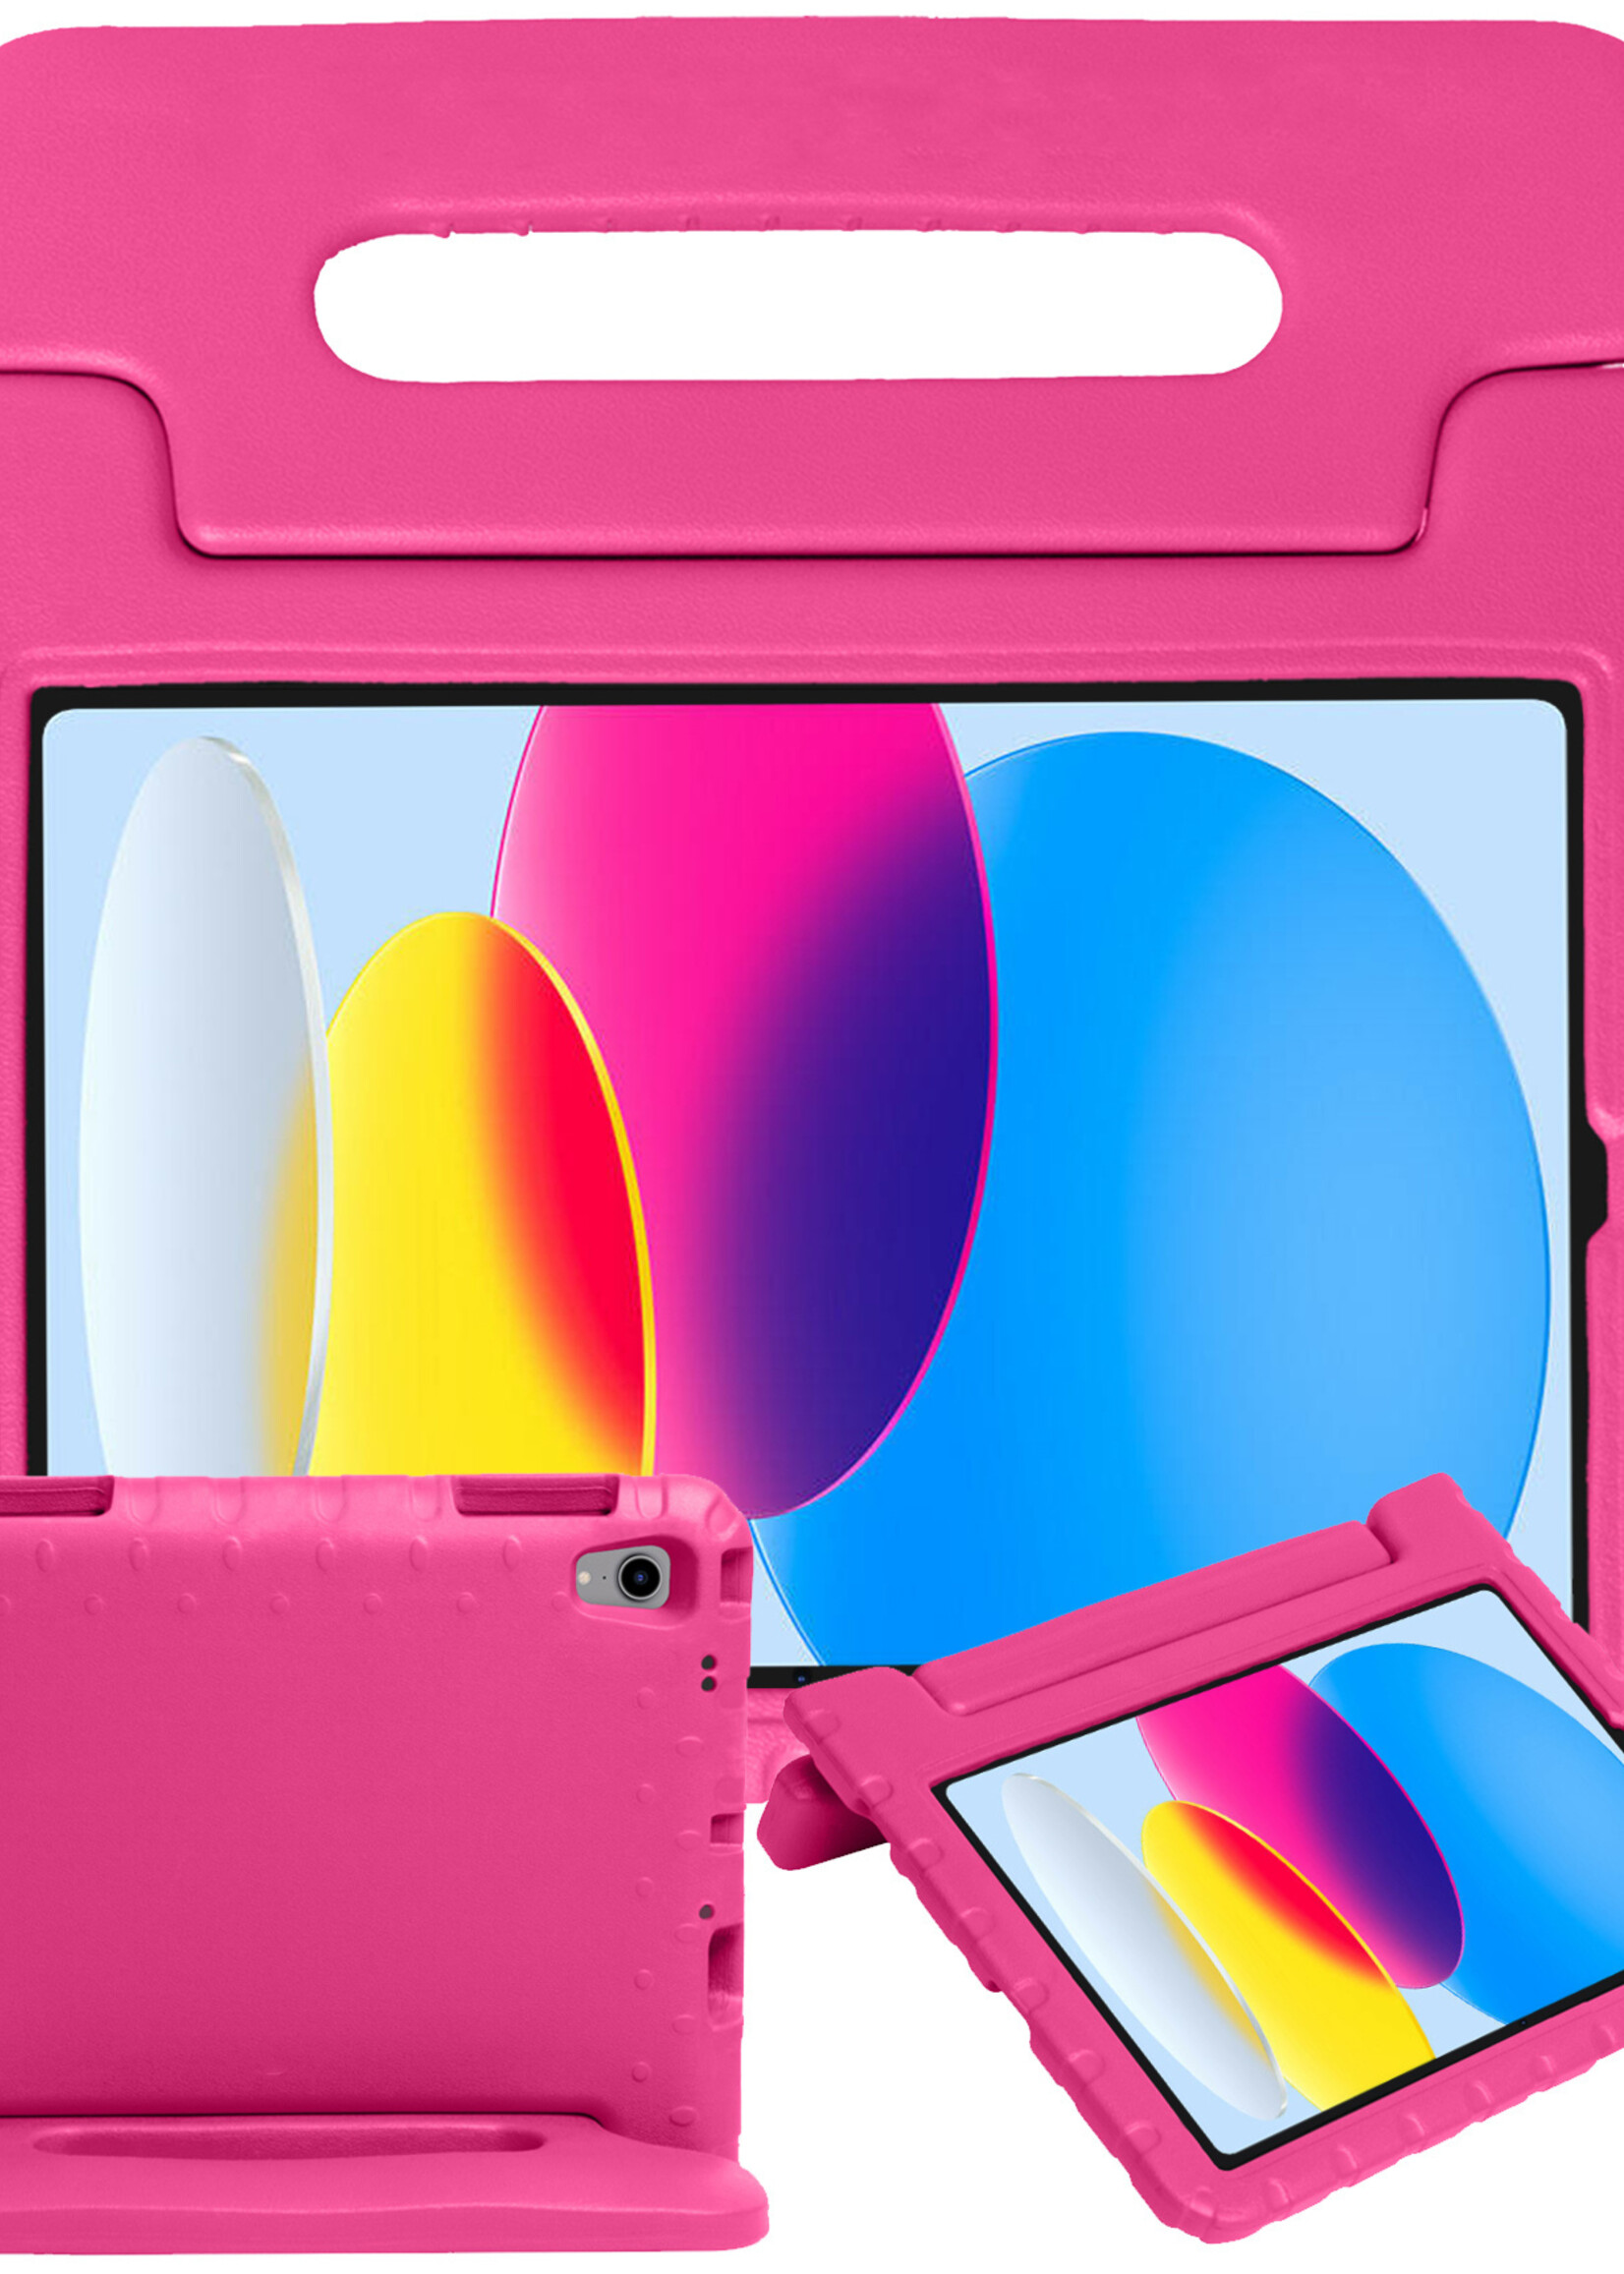 BTH iPad 2022 Hoes Kinder Hoesje Kids Case Cover Kids Proof - iPad 10 2022 Hoesje Kinder Hoes - Roze